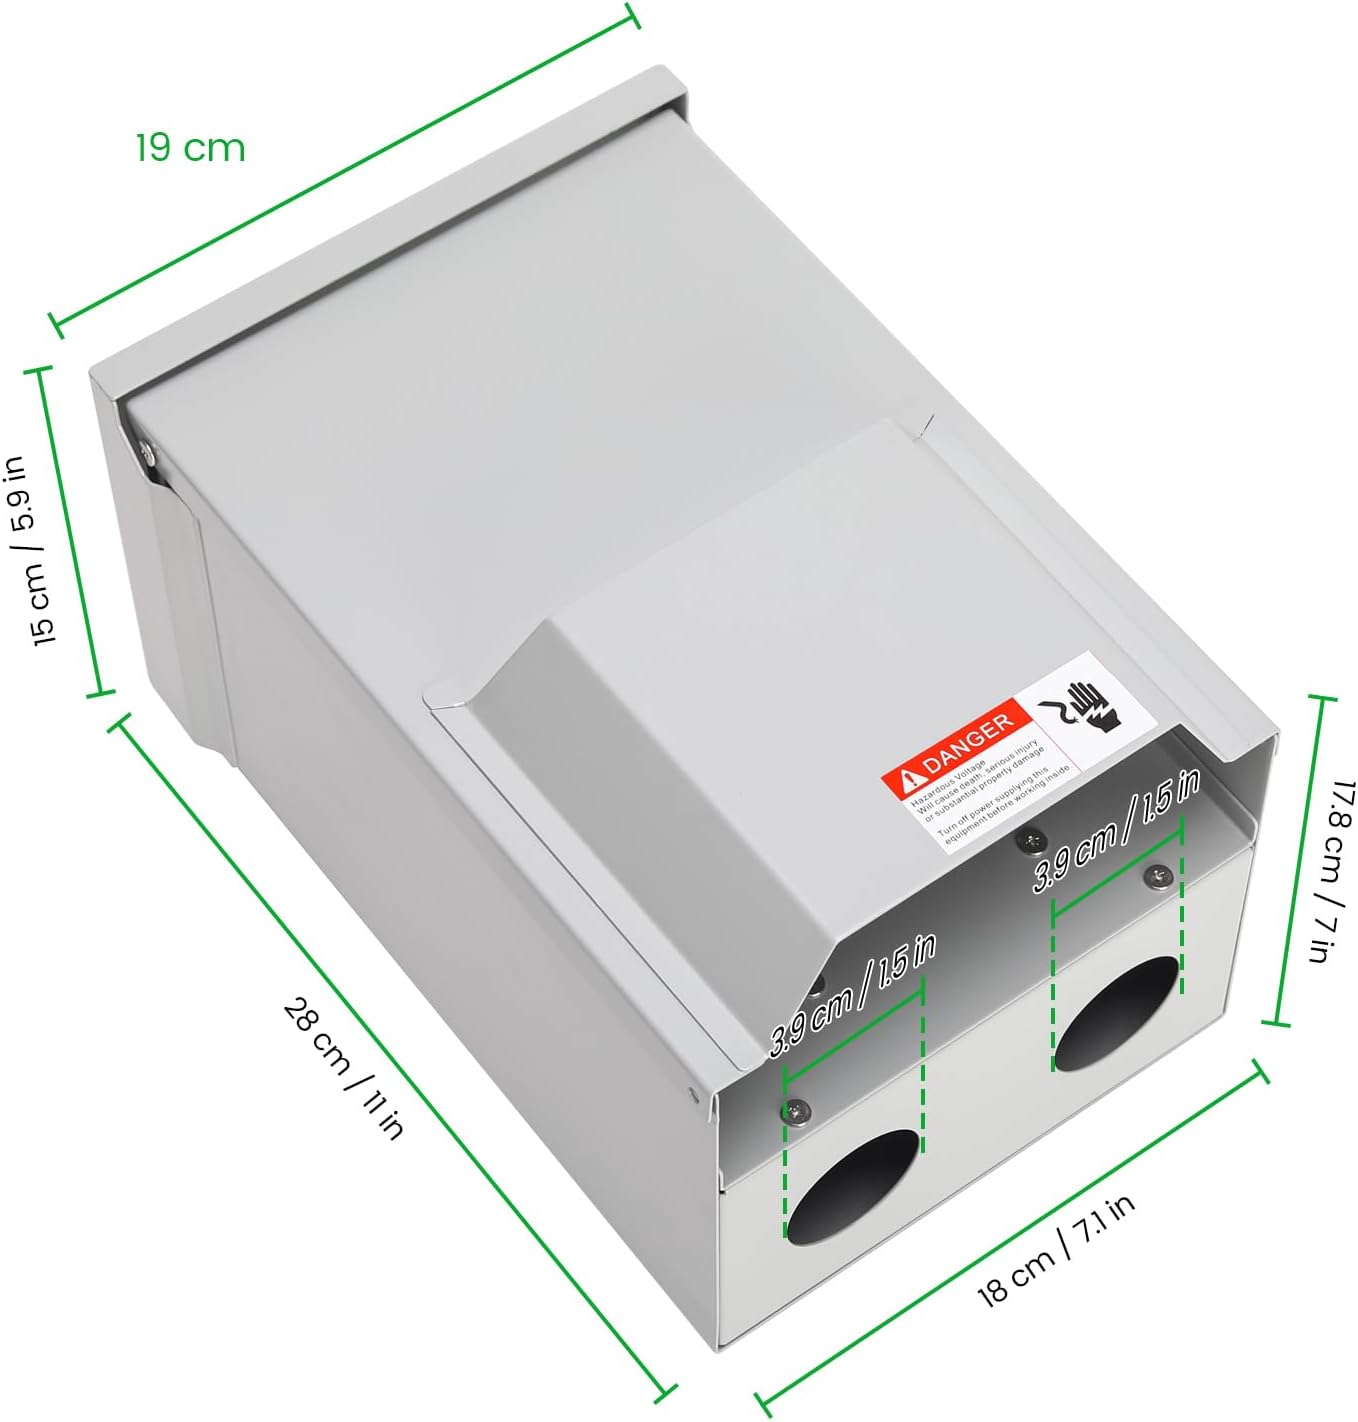 briidea Temporary Power Outlet Panel, RV Panel Outlet with a 20, 50 Amp Receptacle Installed, Prewired, Weatherproof